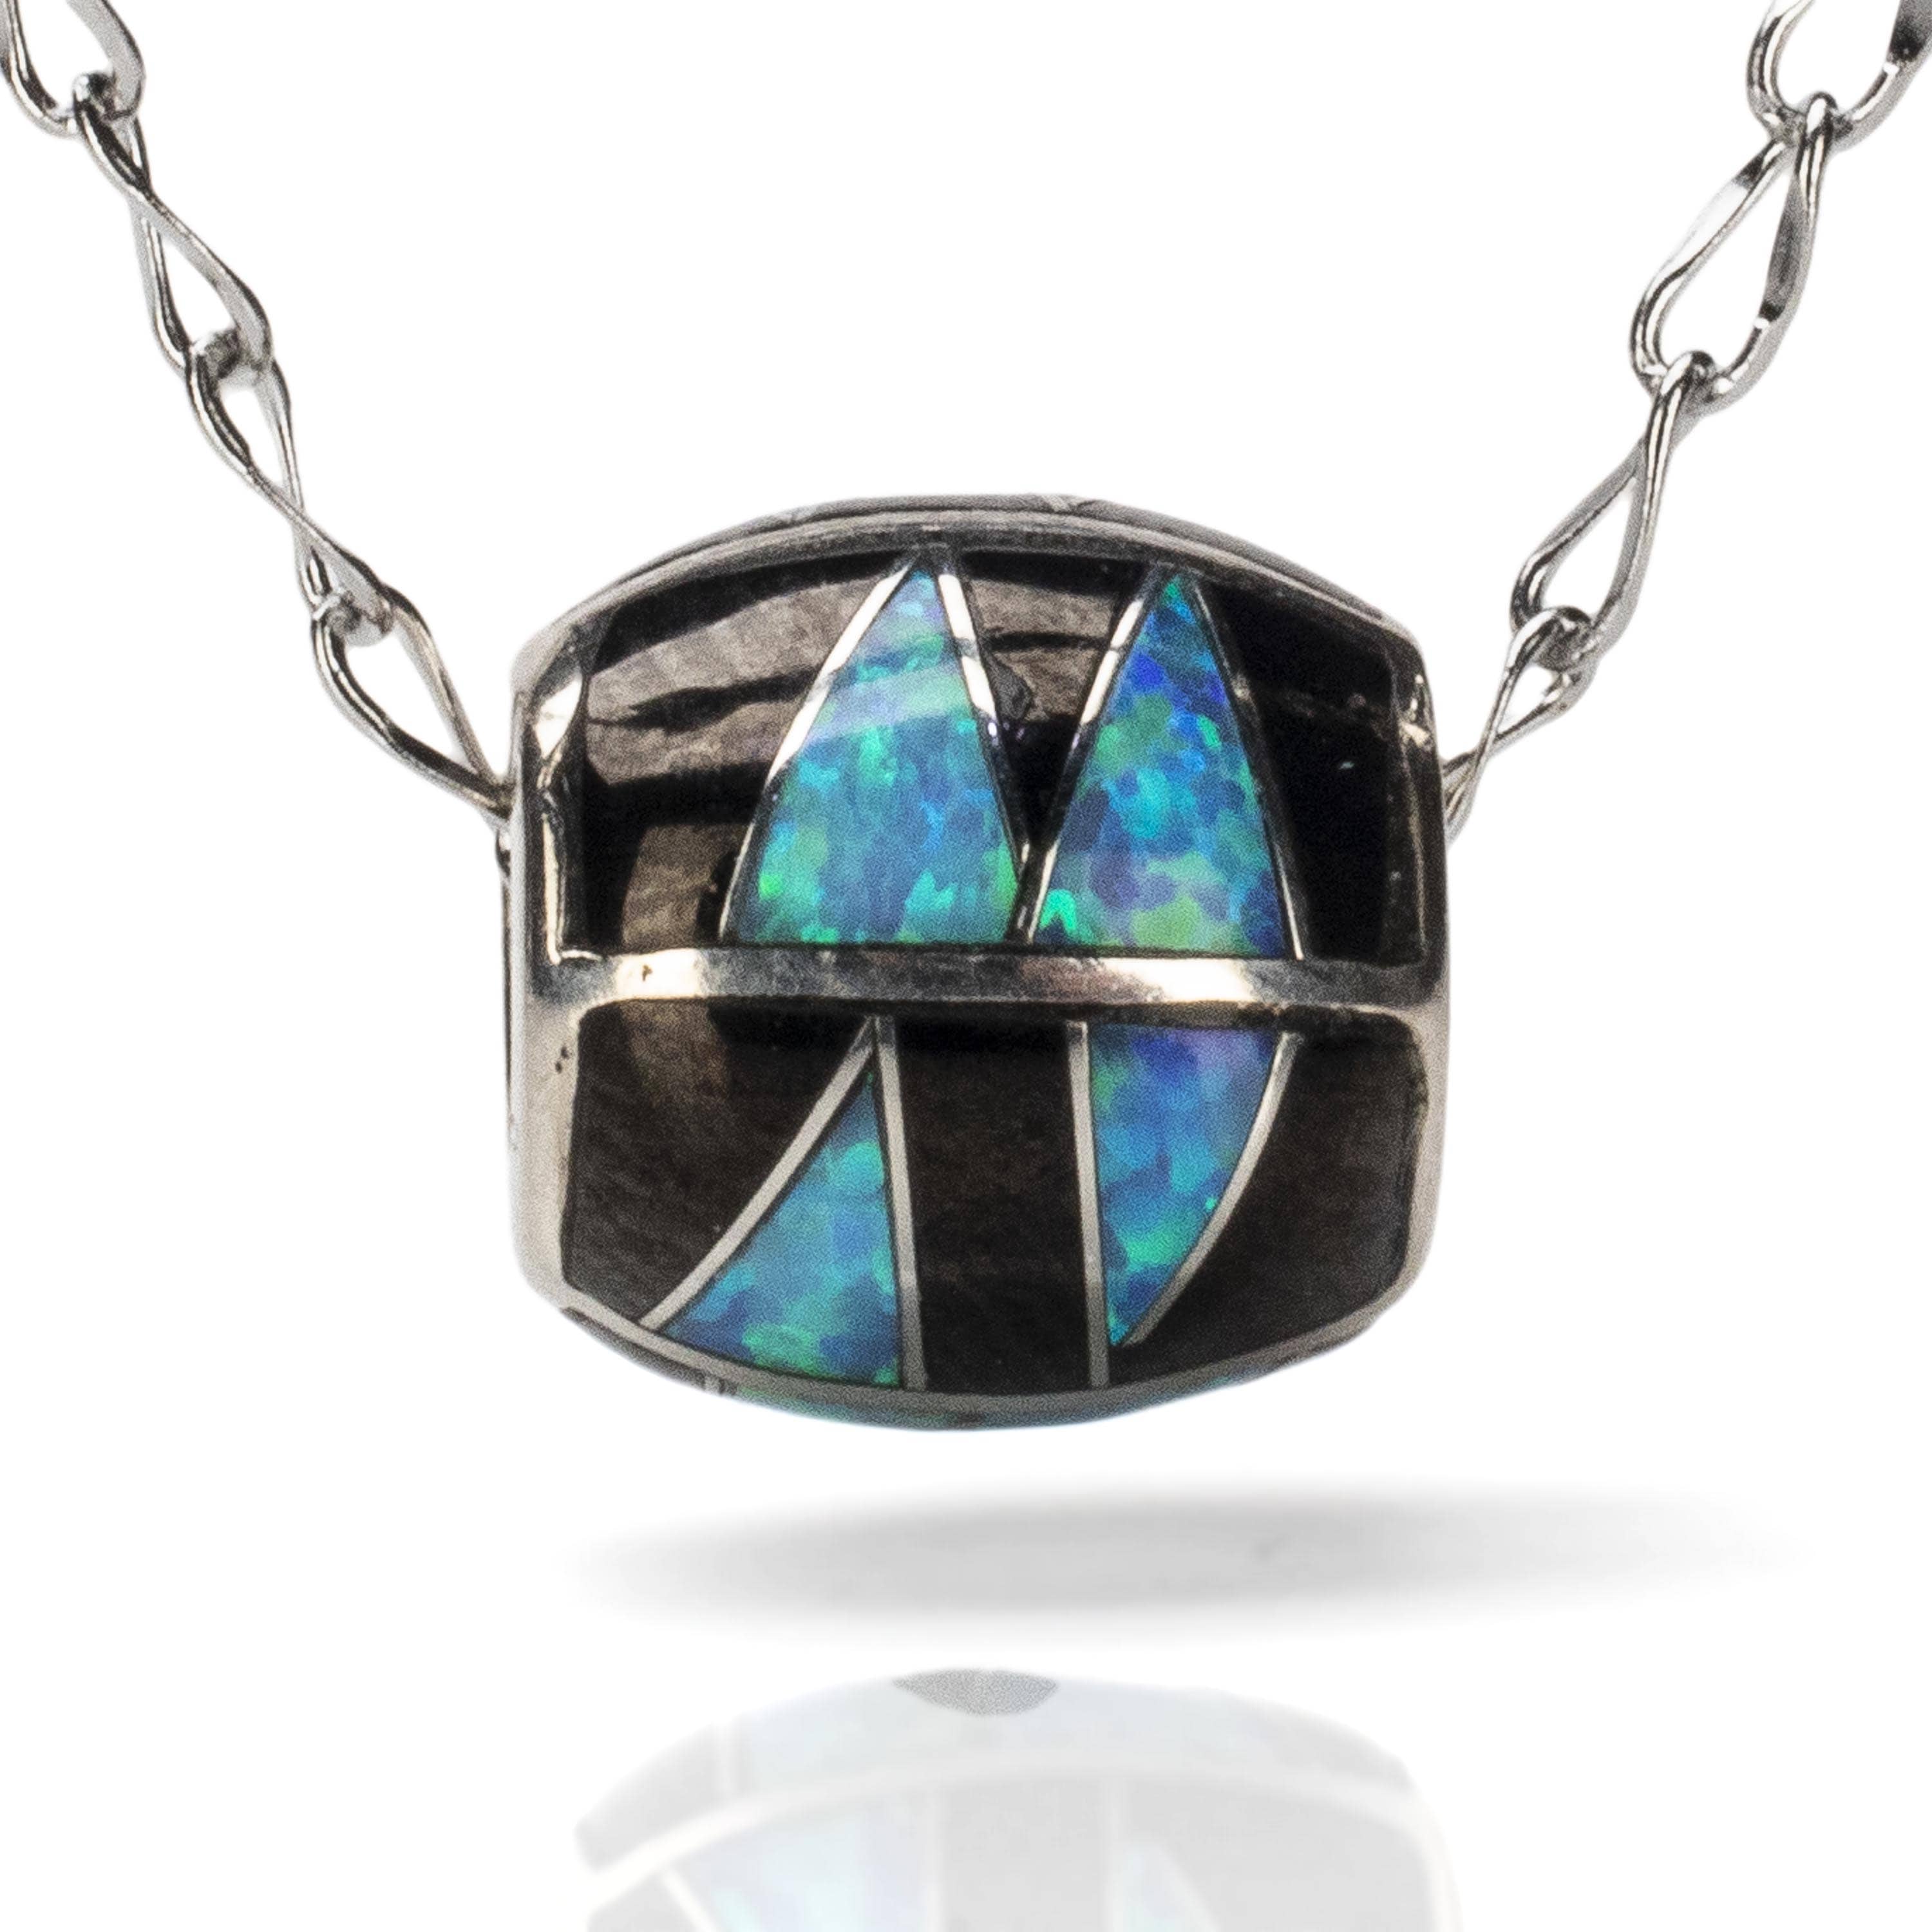 Kalifano Southwest Silver Jewelry Black Onyx Pendant Handmade with Sterling Silver and Aqua Opal Accent NMN.0570.BO2